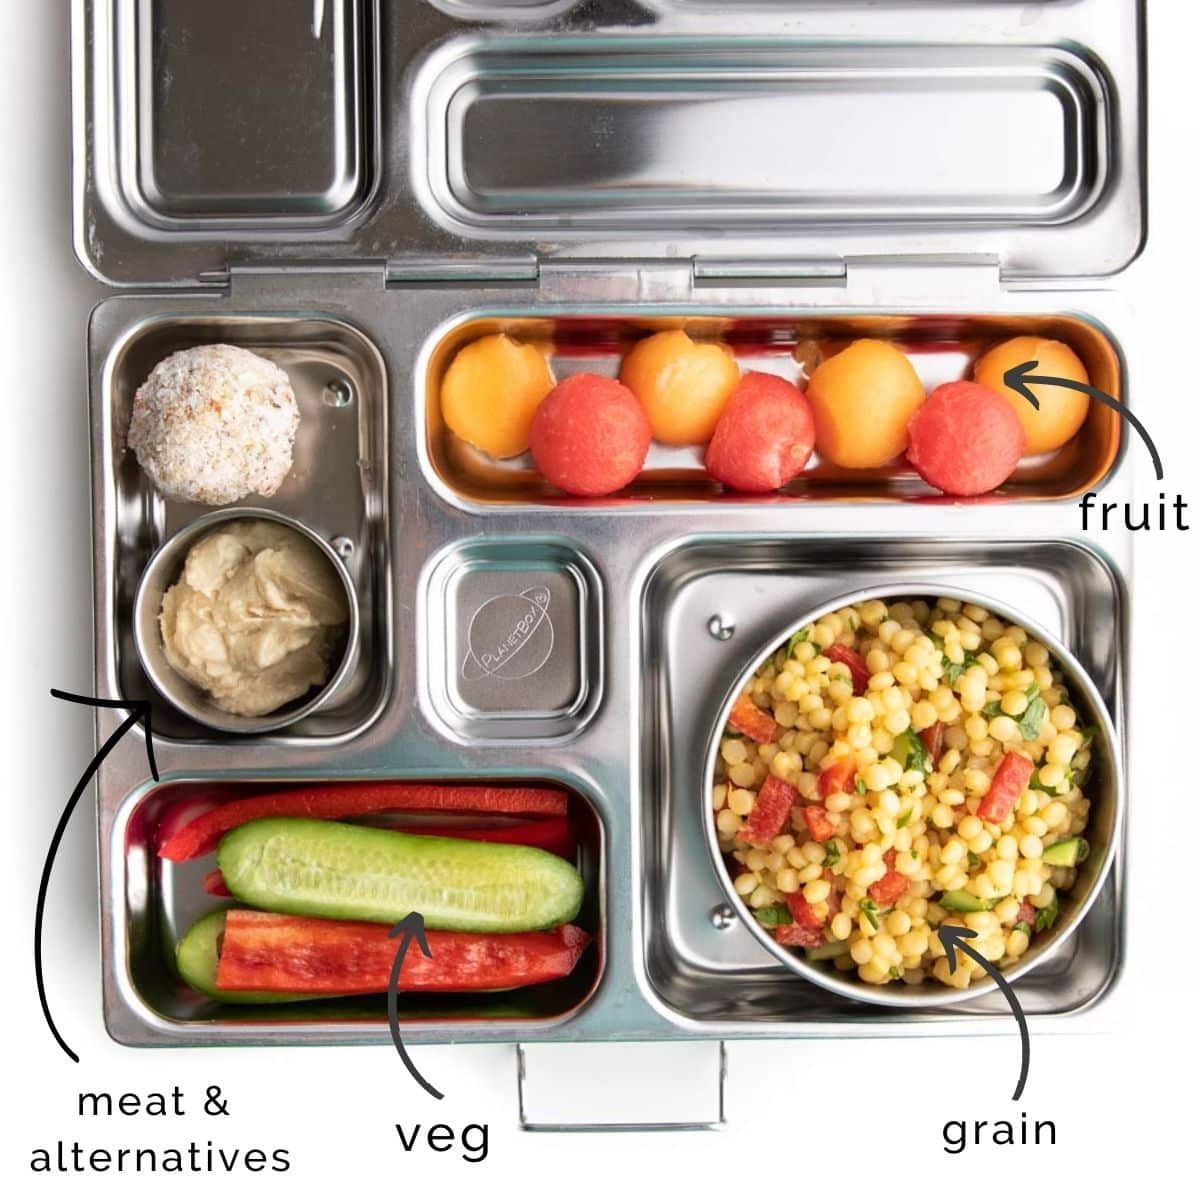 Metal Bento Lunchbox Packed with CousCous Salad, Melon Balls, Bell Pepper Stips, Cucumber, Hummus and a Oat Ball.